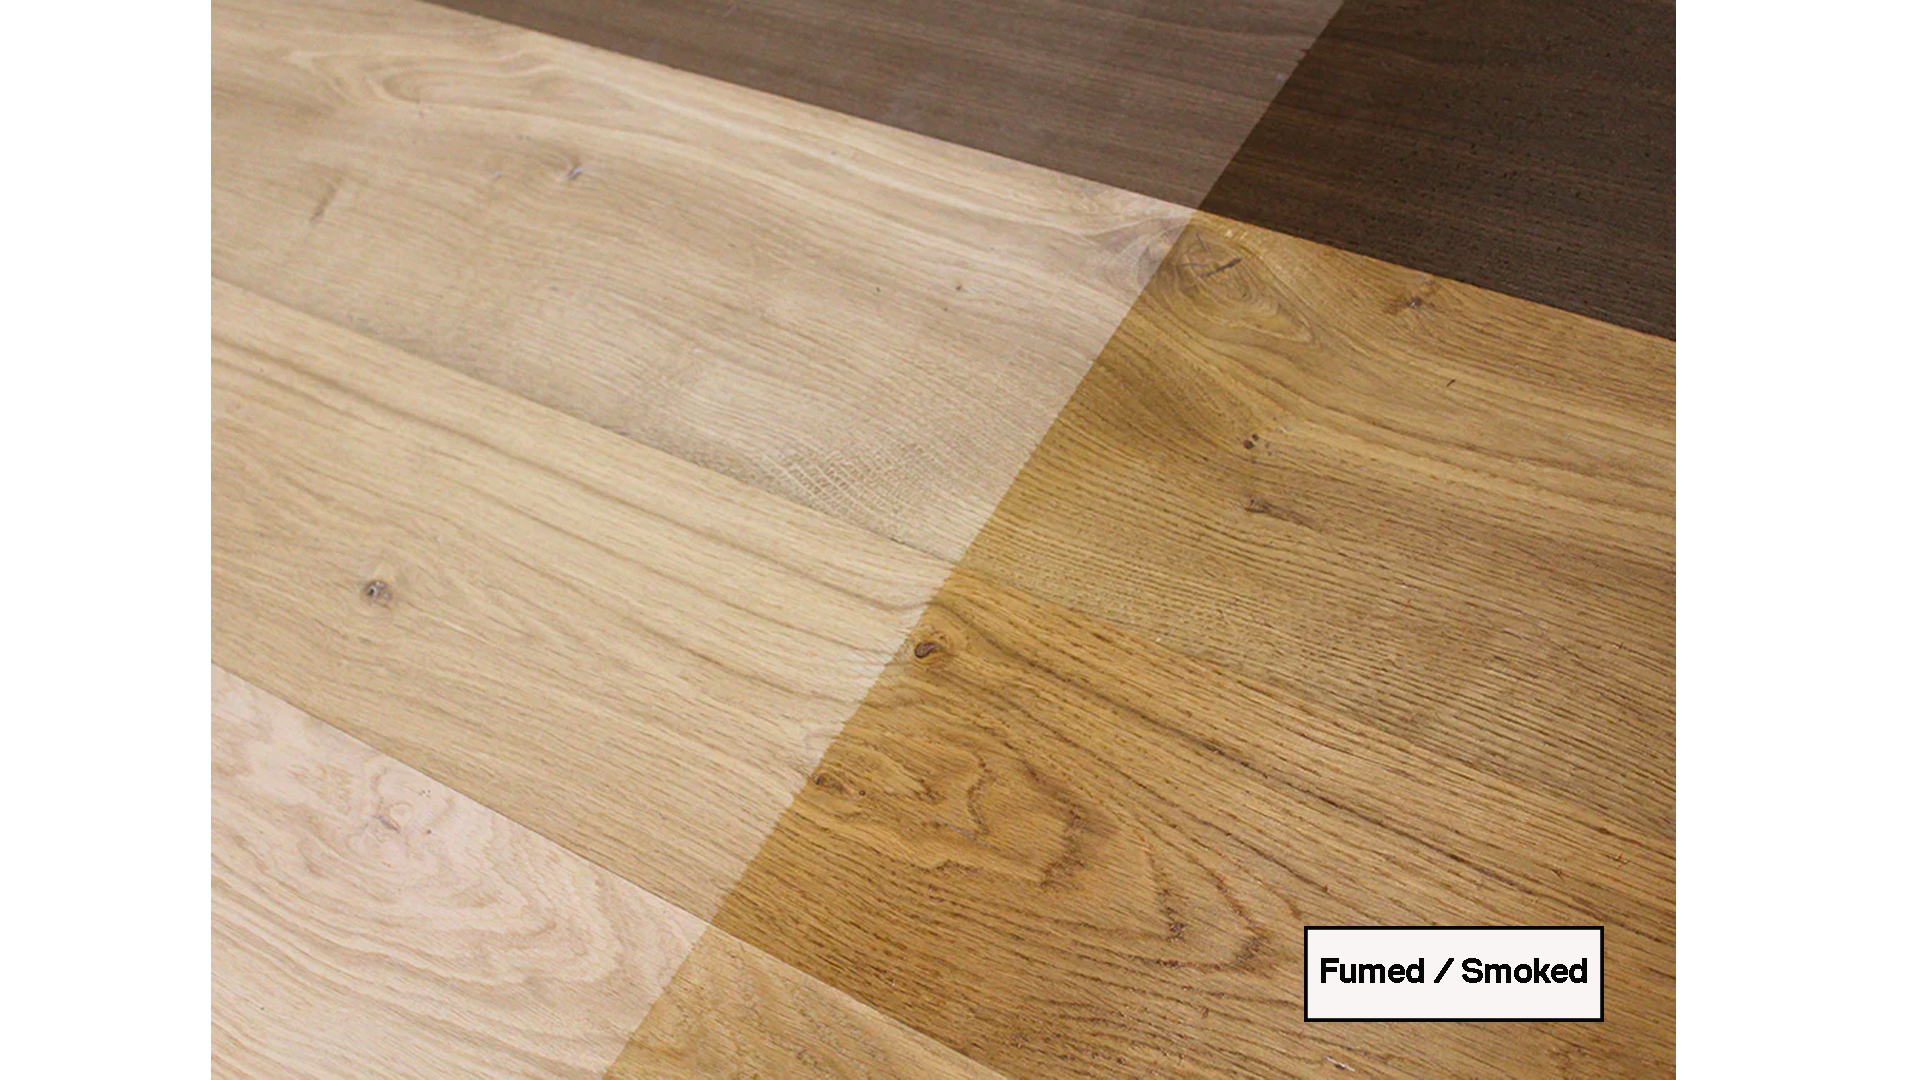 Wood Flooring Surface treatment of Fumed & Smoked